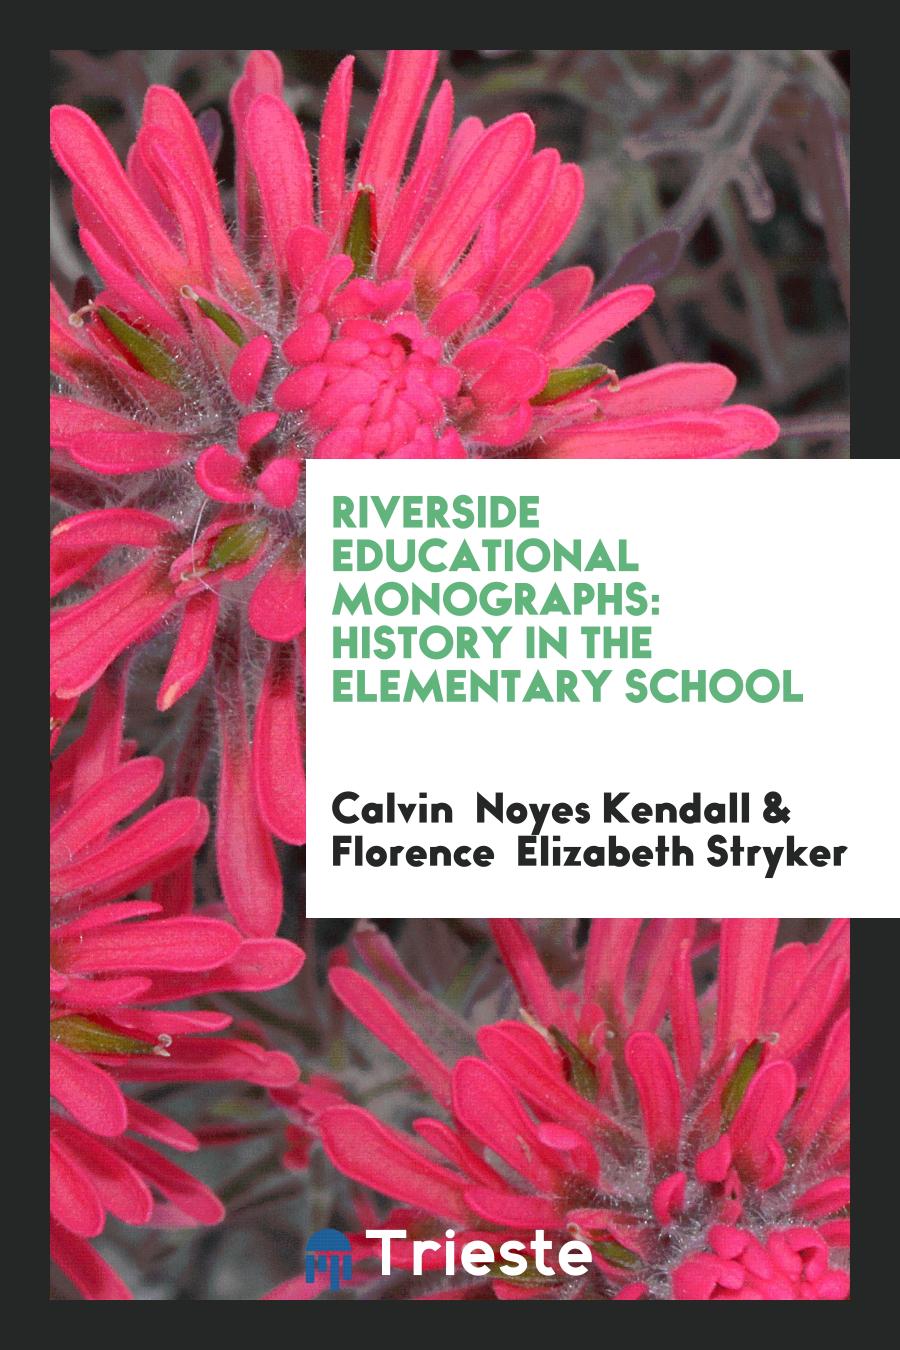 Riverside Educational Monographs: History in the Elementary School